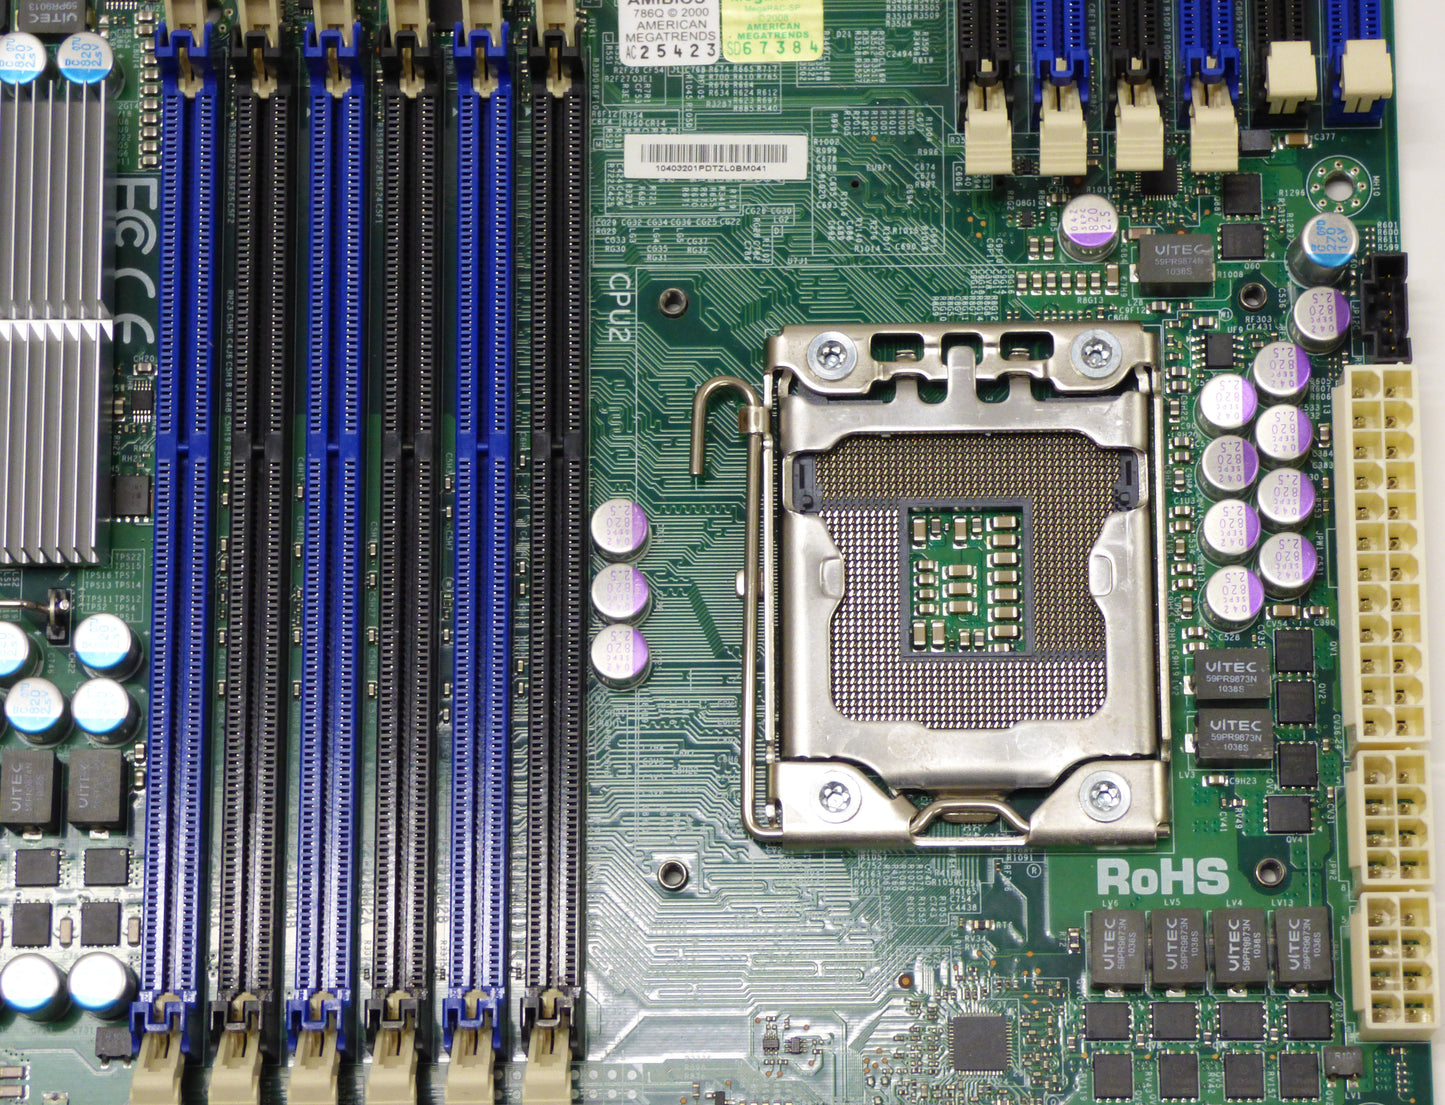 supermicro x8dti-f cpu 2 and dimm slots